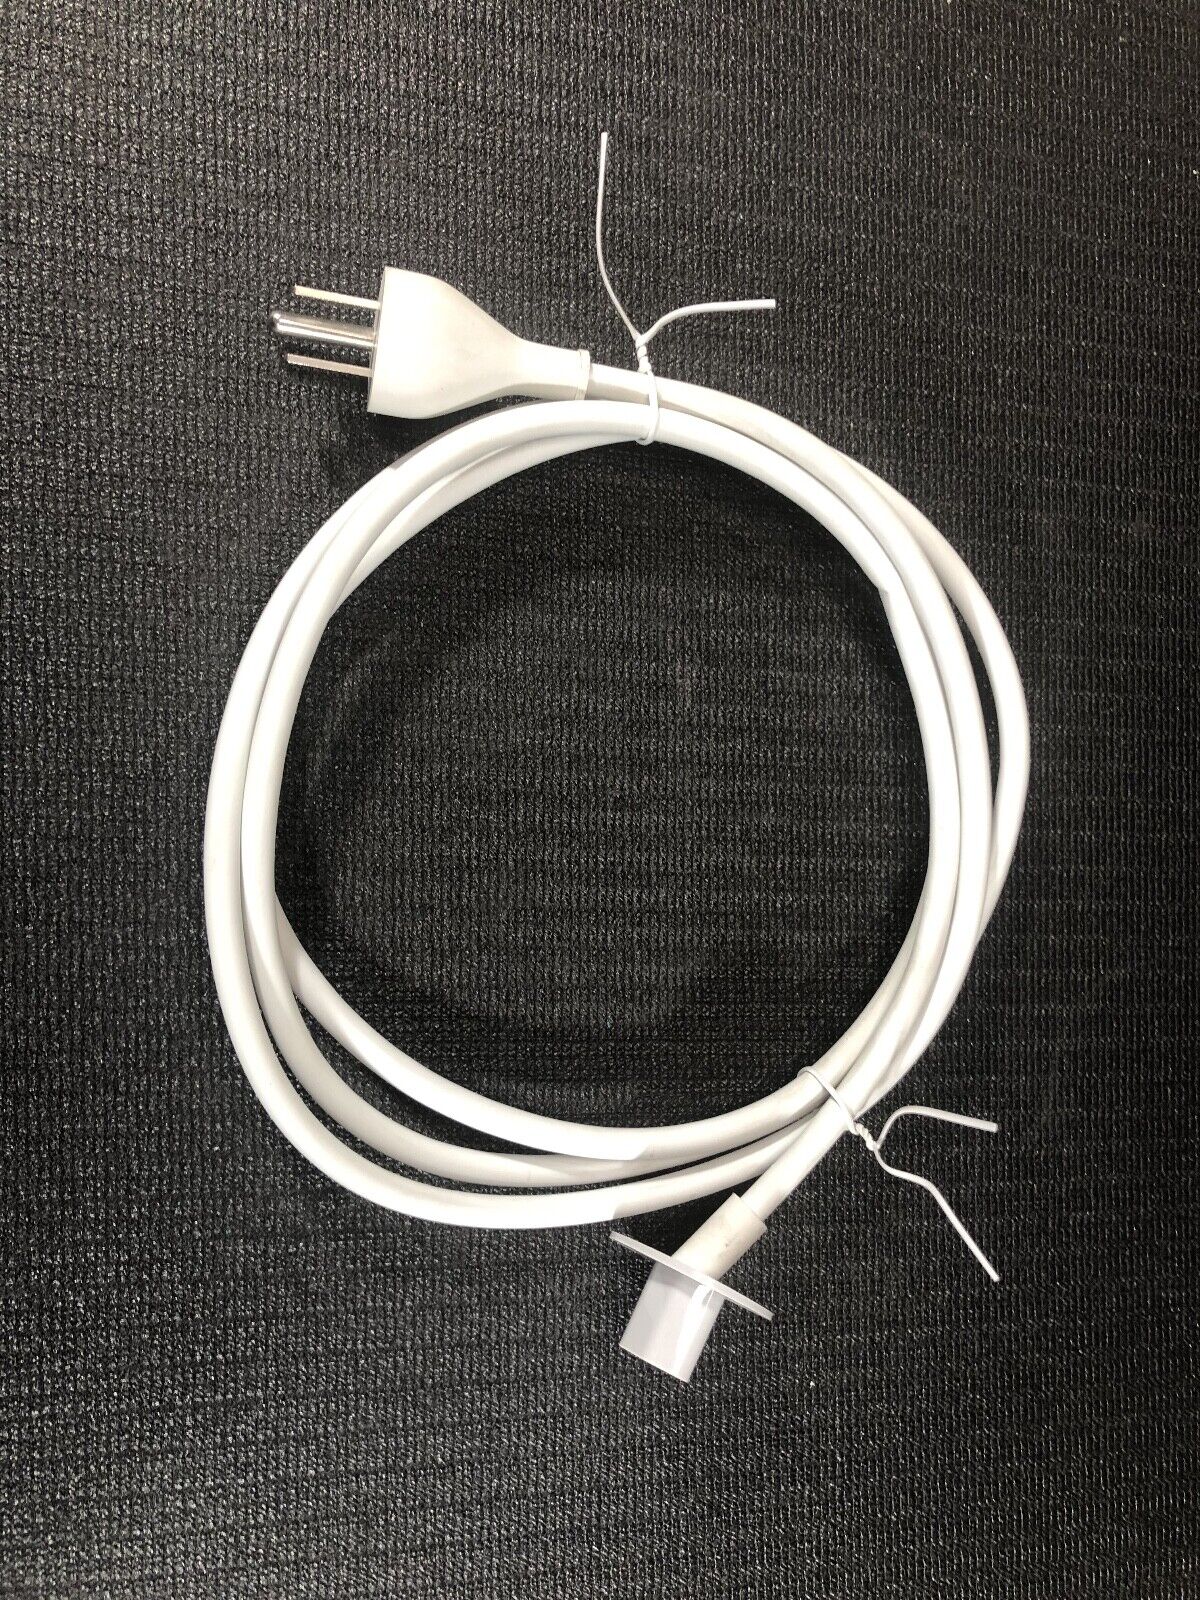 AC Power Cord Cable For Apple iMac 21.5\